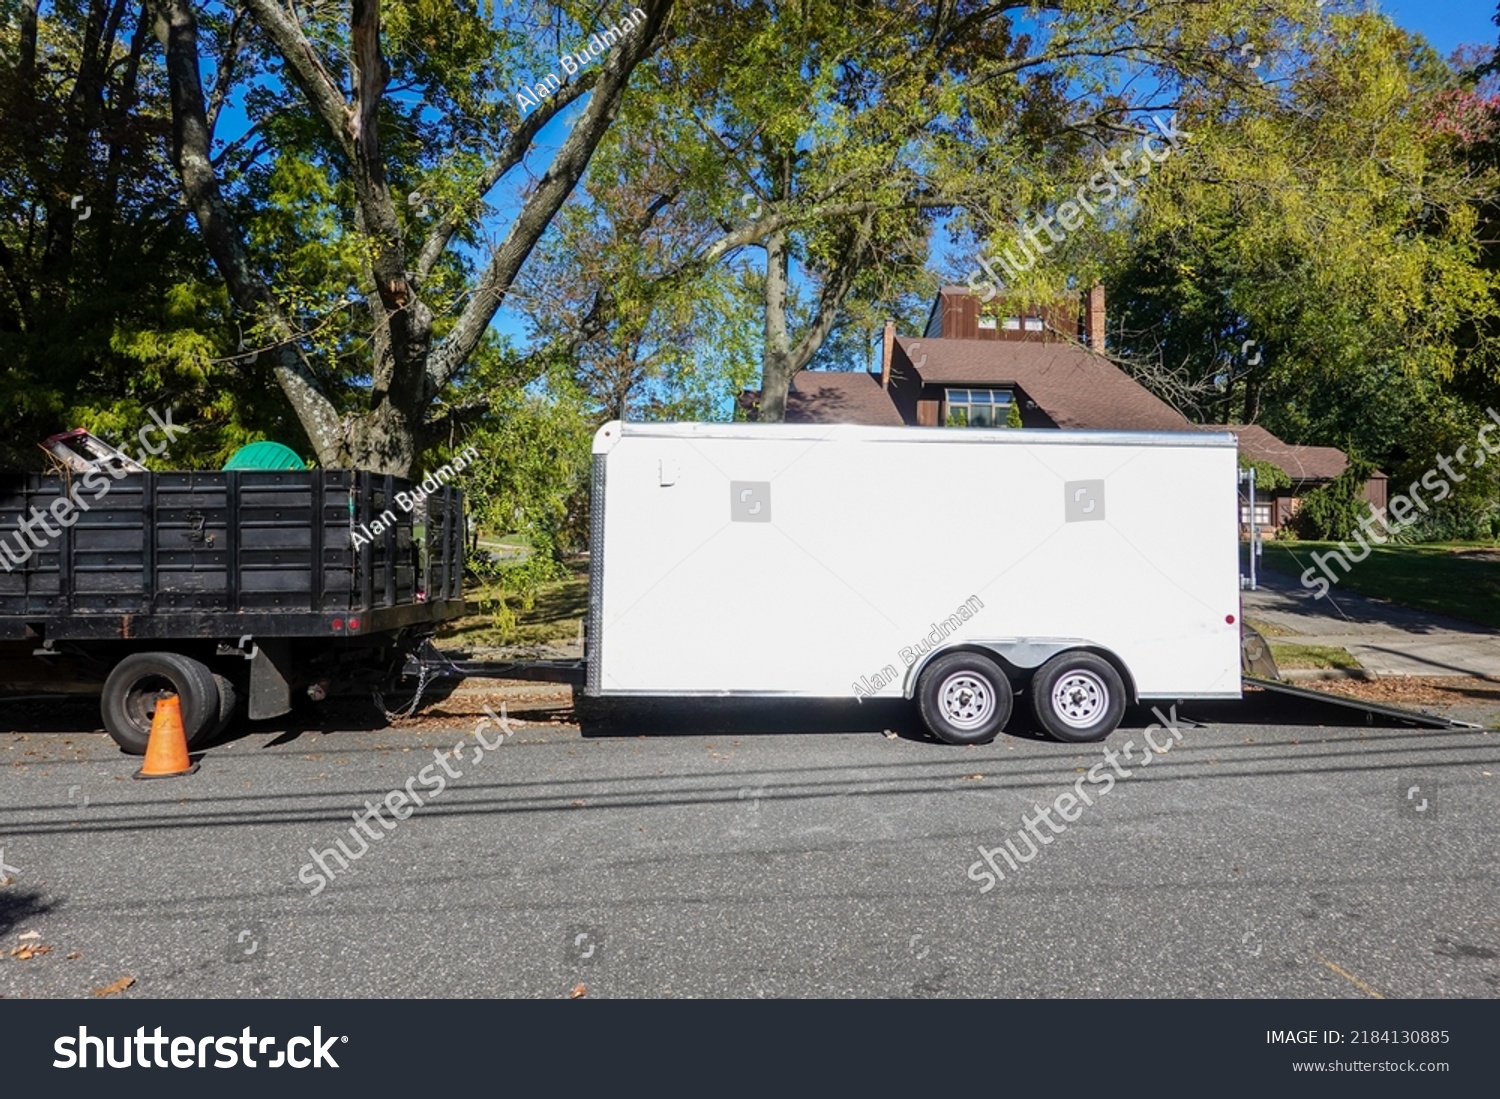 A landscaping truck with a long white enclosed trailer trailer seen on a shady residential asphalt street #2184130885